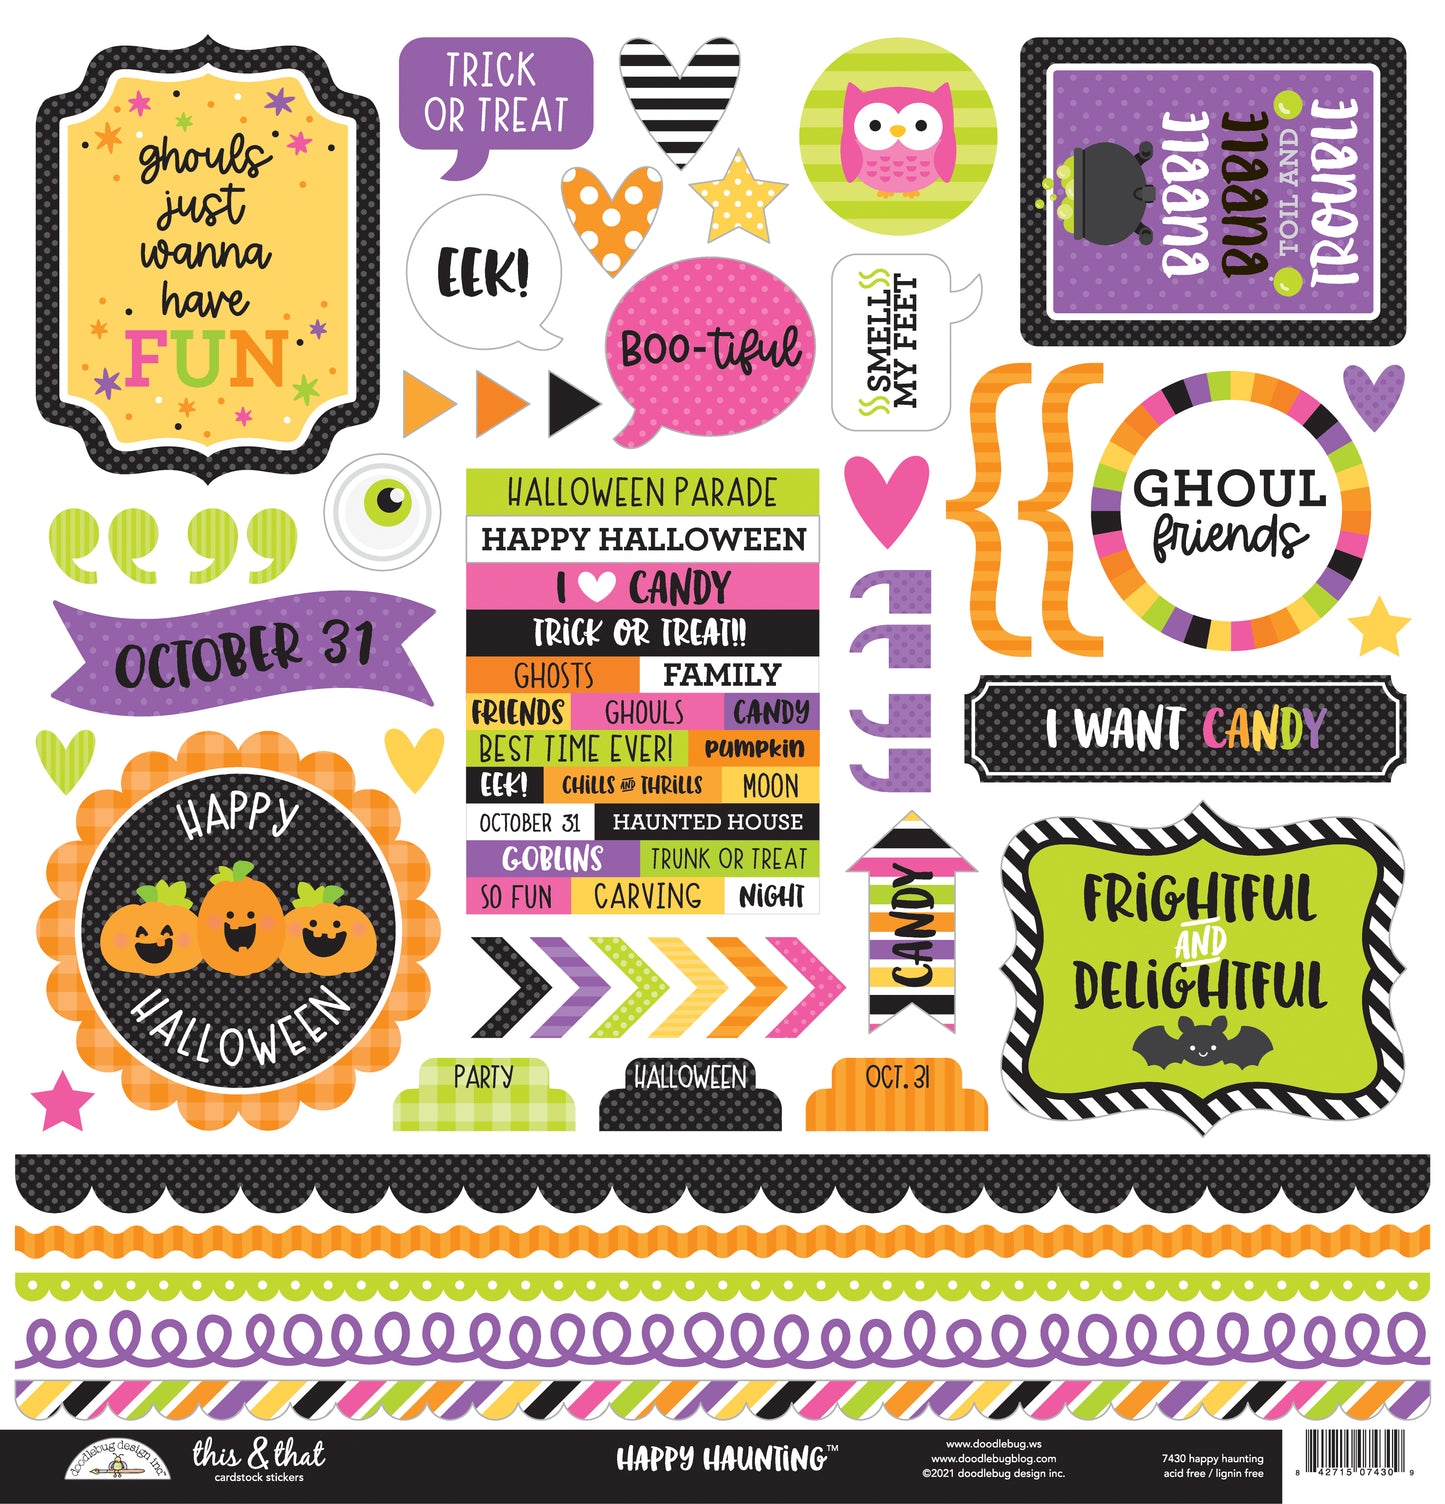 Happy Haunting This & That Stickers by Doodlebug Designs